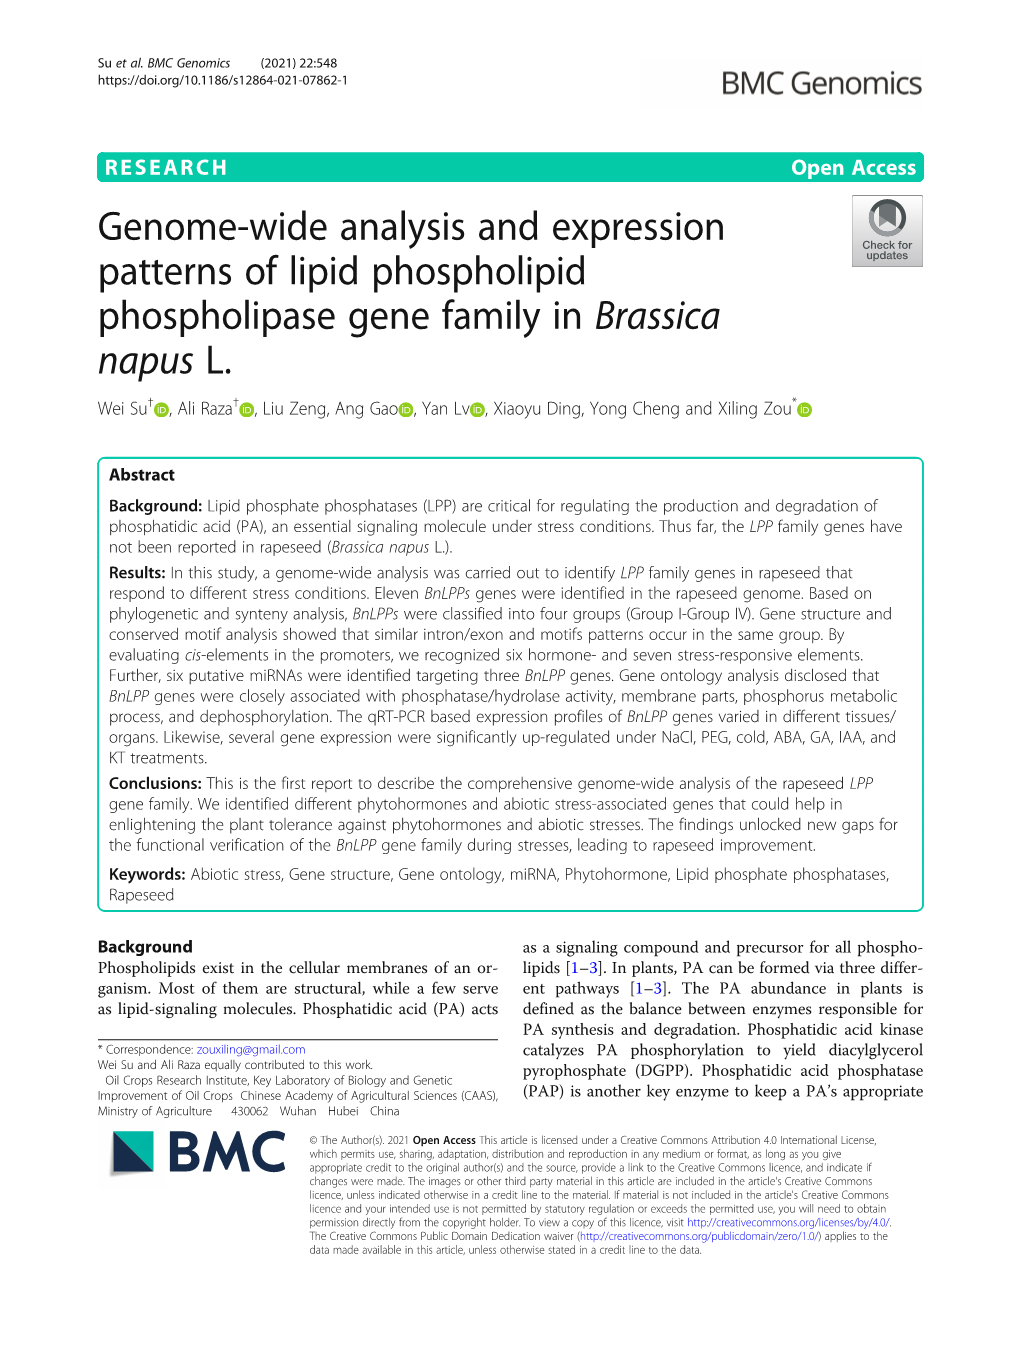 Genome-Wide Analysis and Expression Patterns of Lipid Phospholipid Phospholipase Gene Family in Brassica Napus L